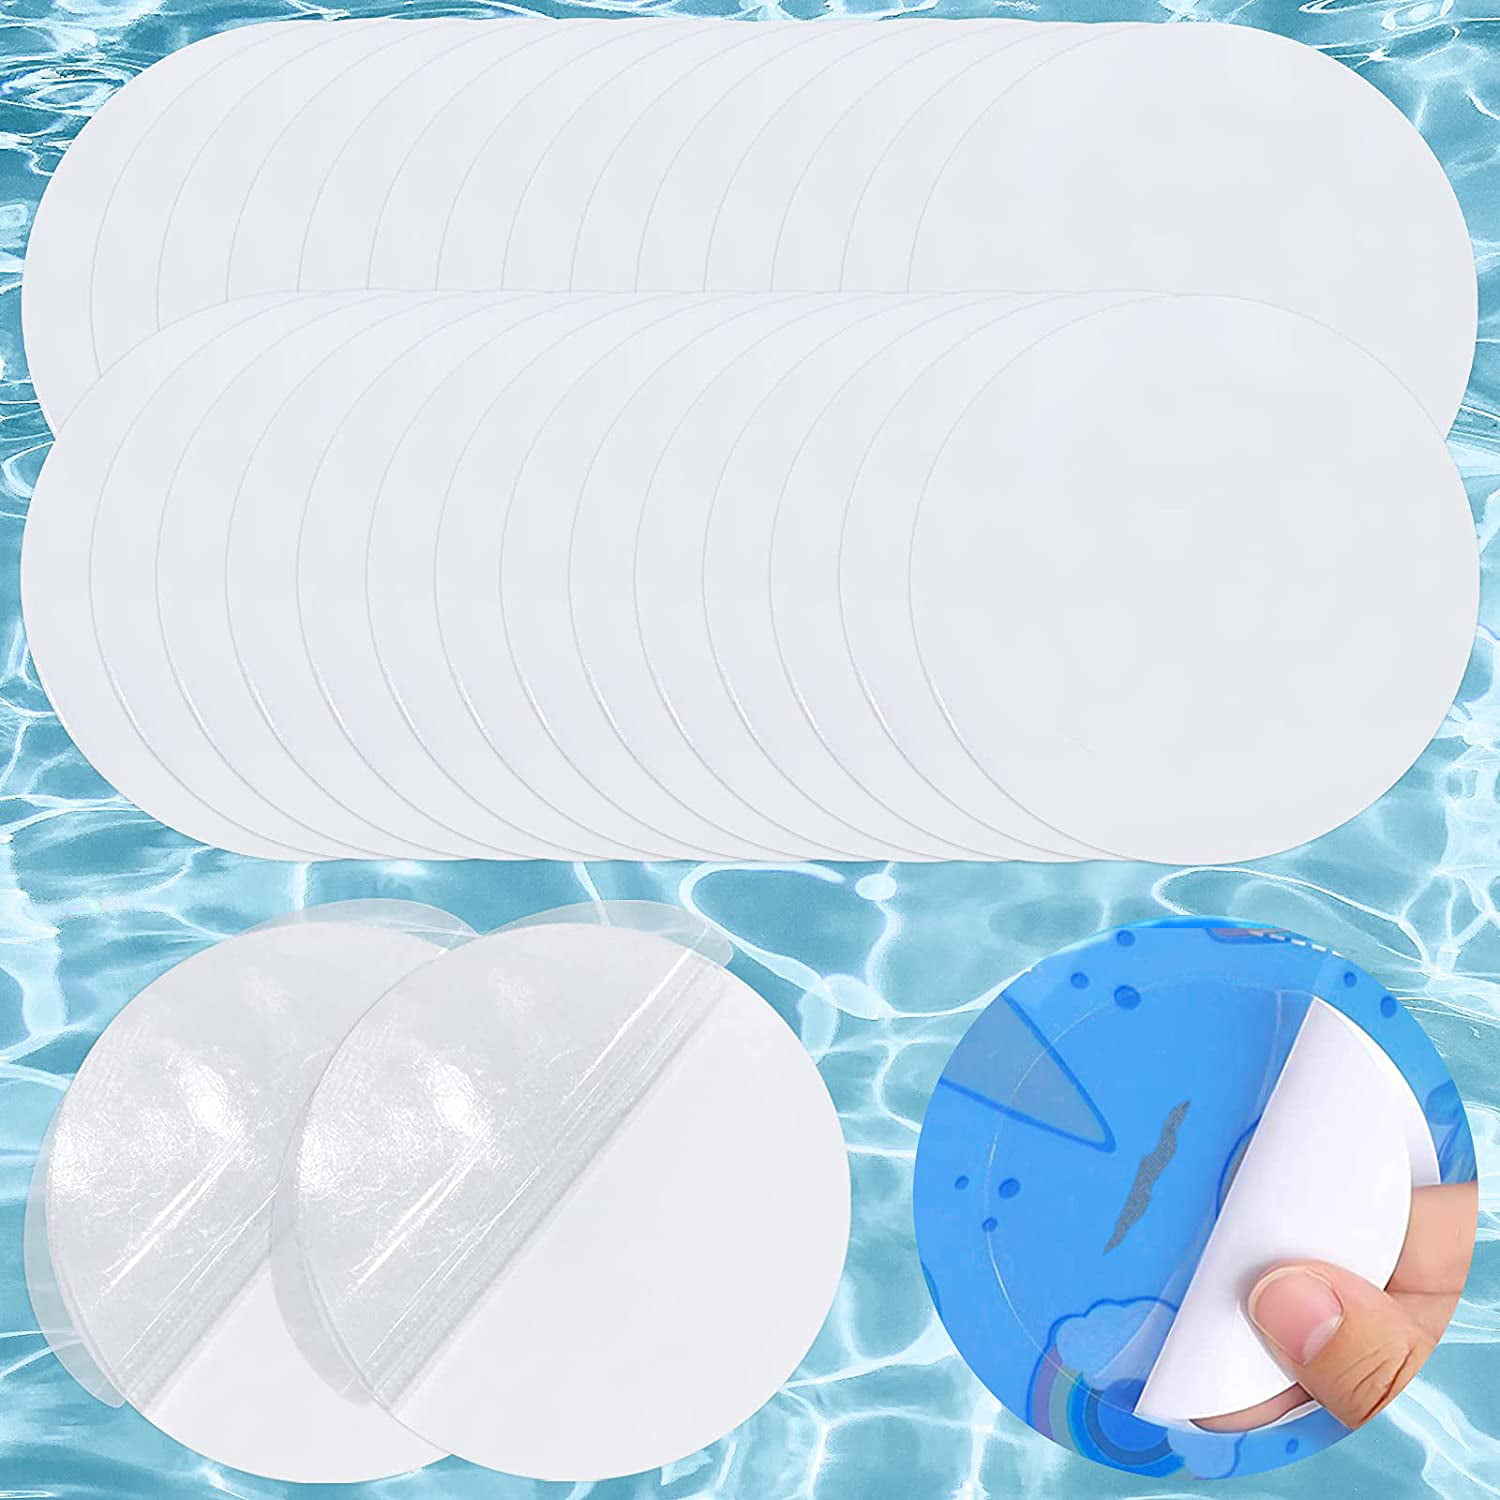 Details about   2 Ft Blue Inground & Aboveground Swimming Pool Vinyl Liner Patch Repair Kit 